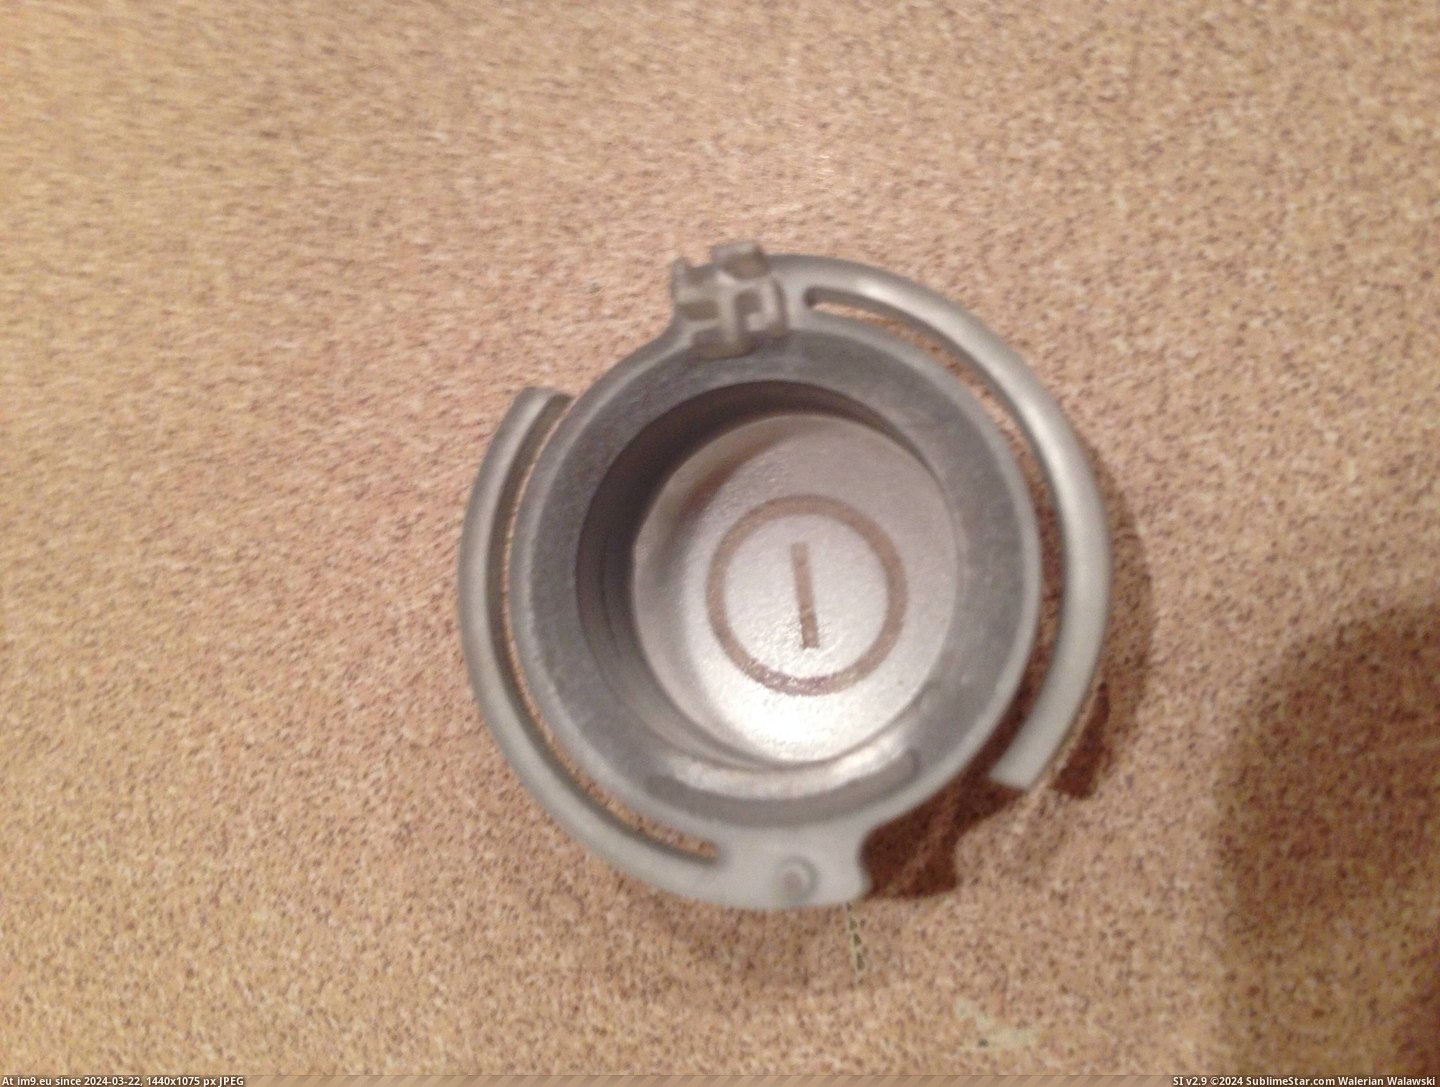 #Power #Button #Swastika #Dryer #Backside [Mildlyinteresting] There is a swastika on the backside of the power button for my dryer. Pic. (Image of album My r/MILDLYINTERESTING favs))